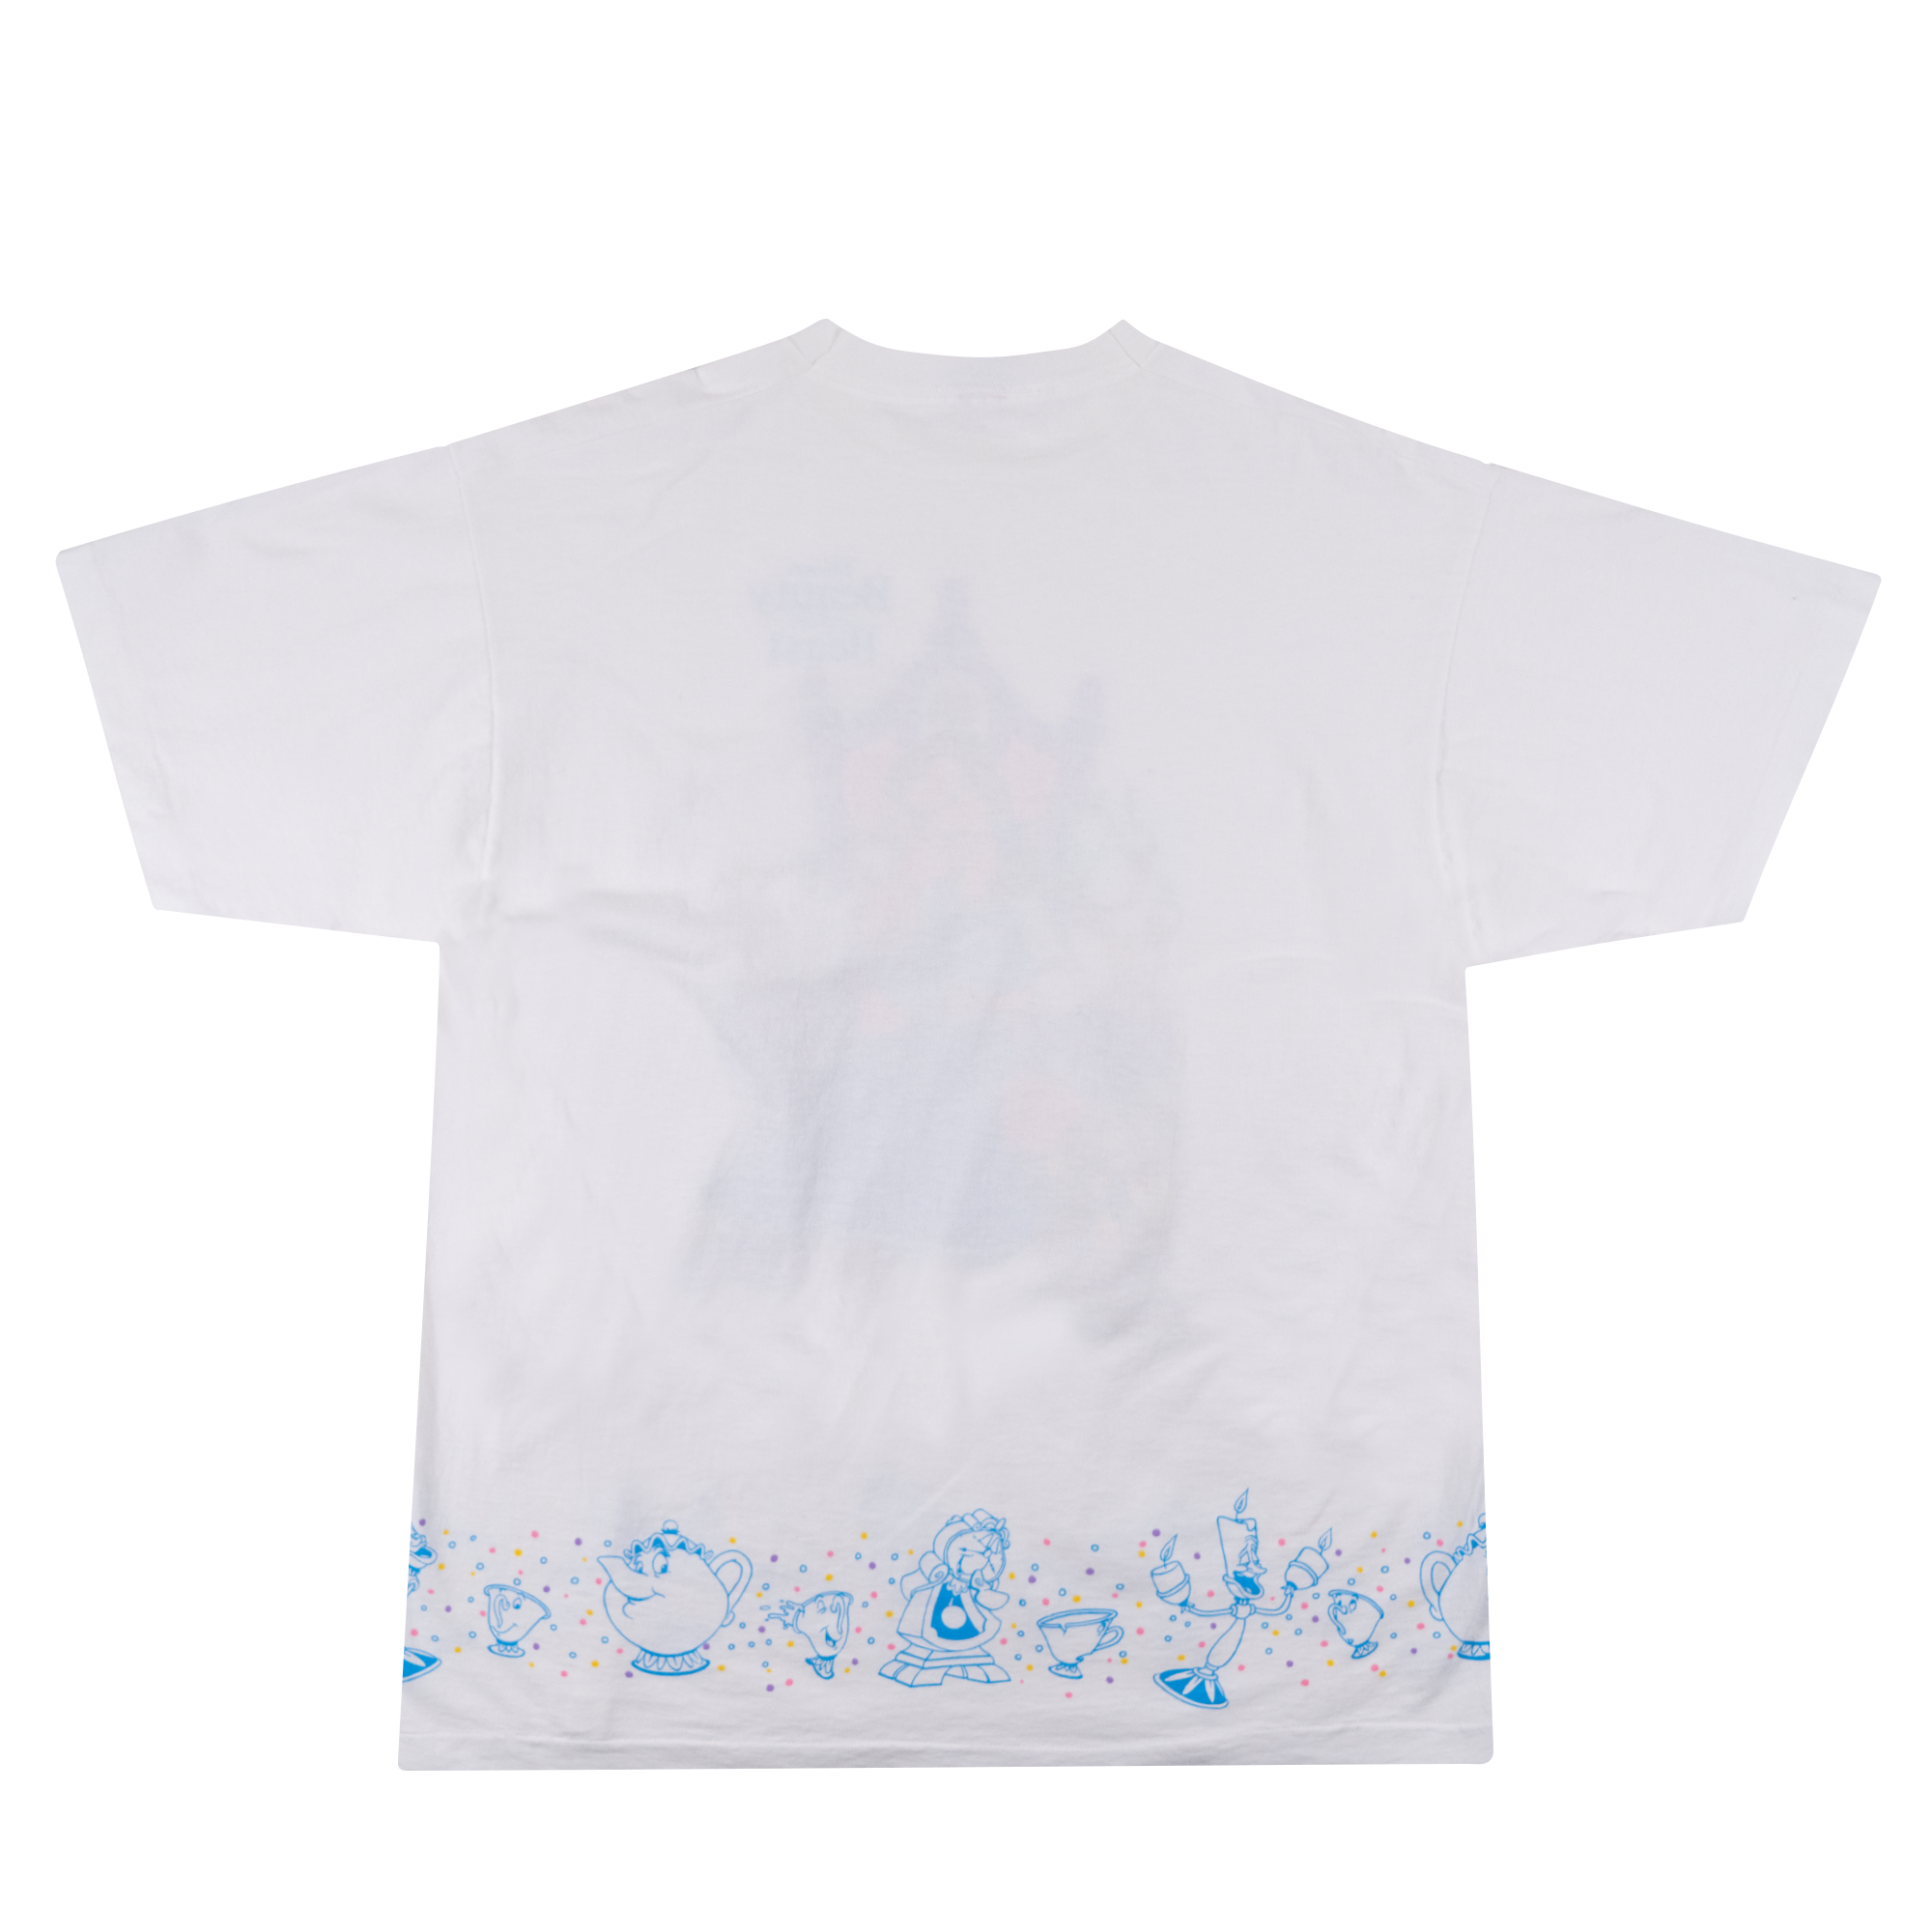 Beauty And The Beast Tee White-PLUS